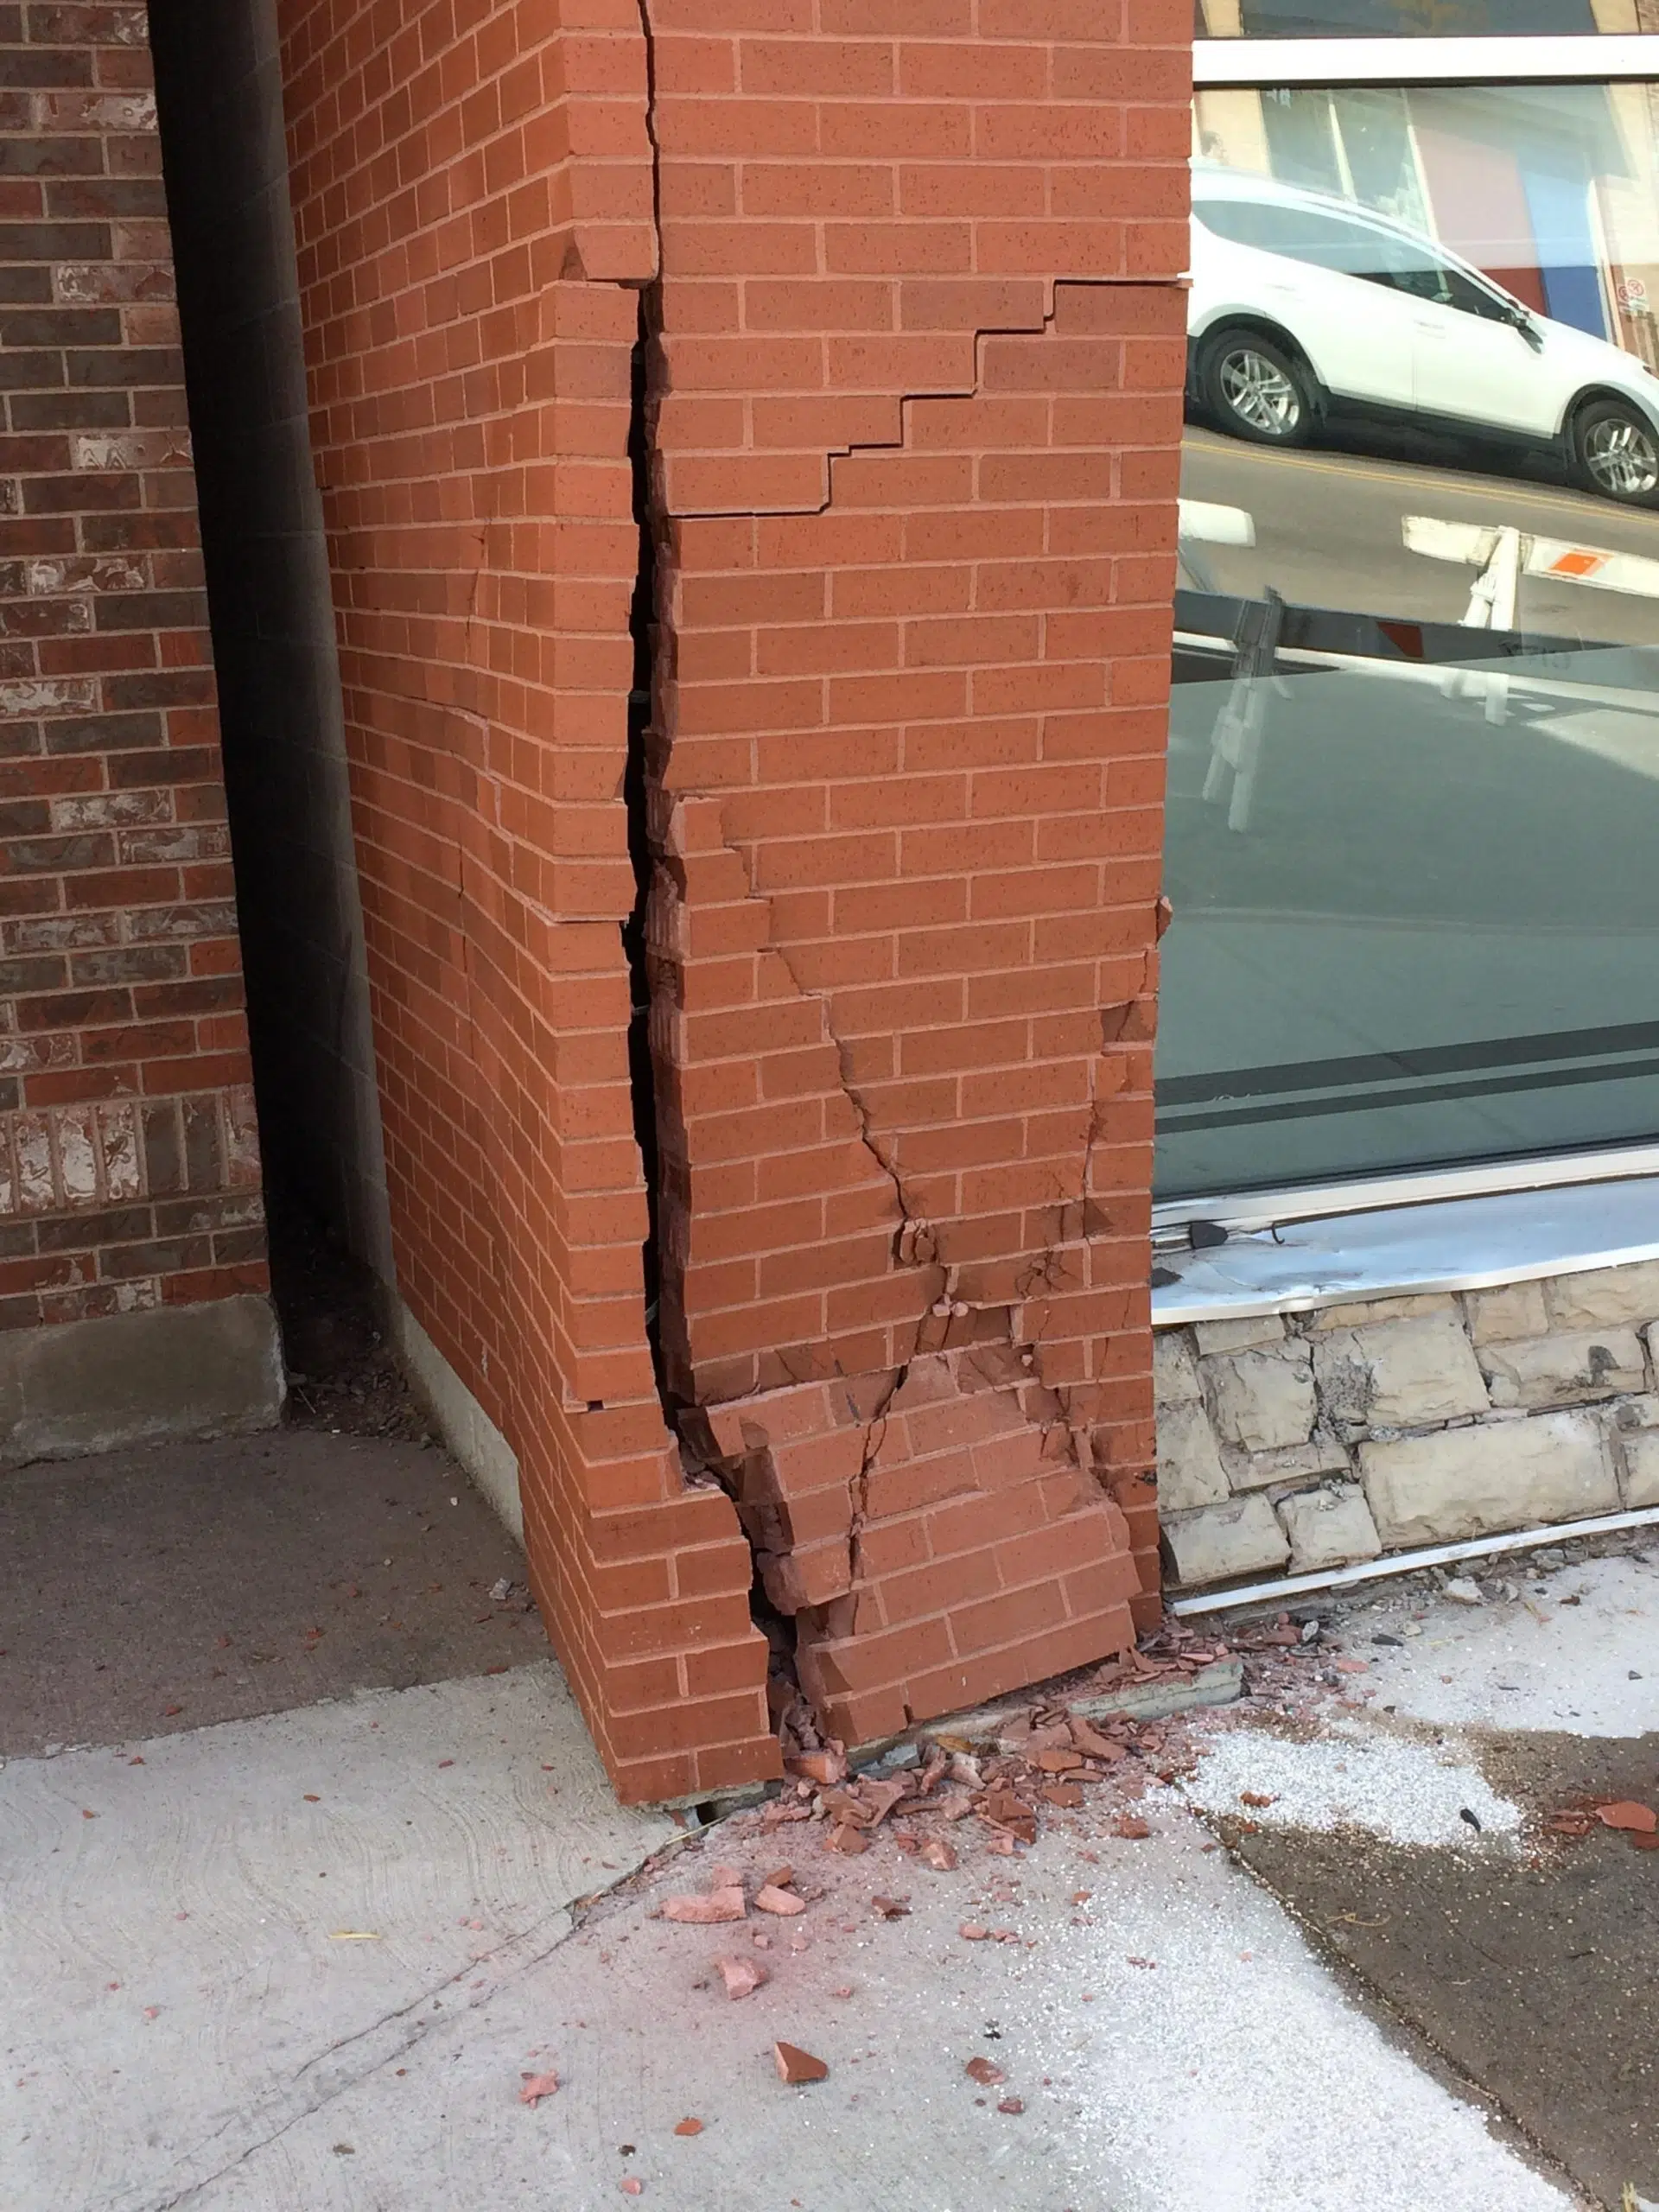 Car strikes building in downtown Charlottetown